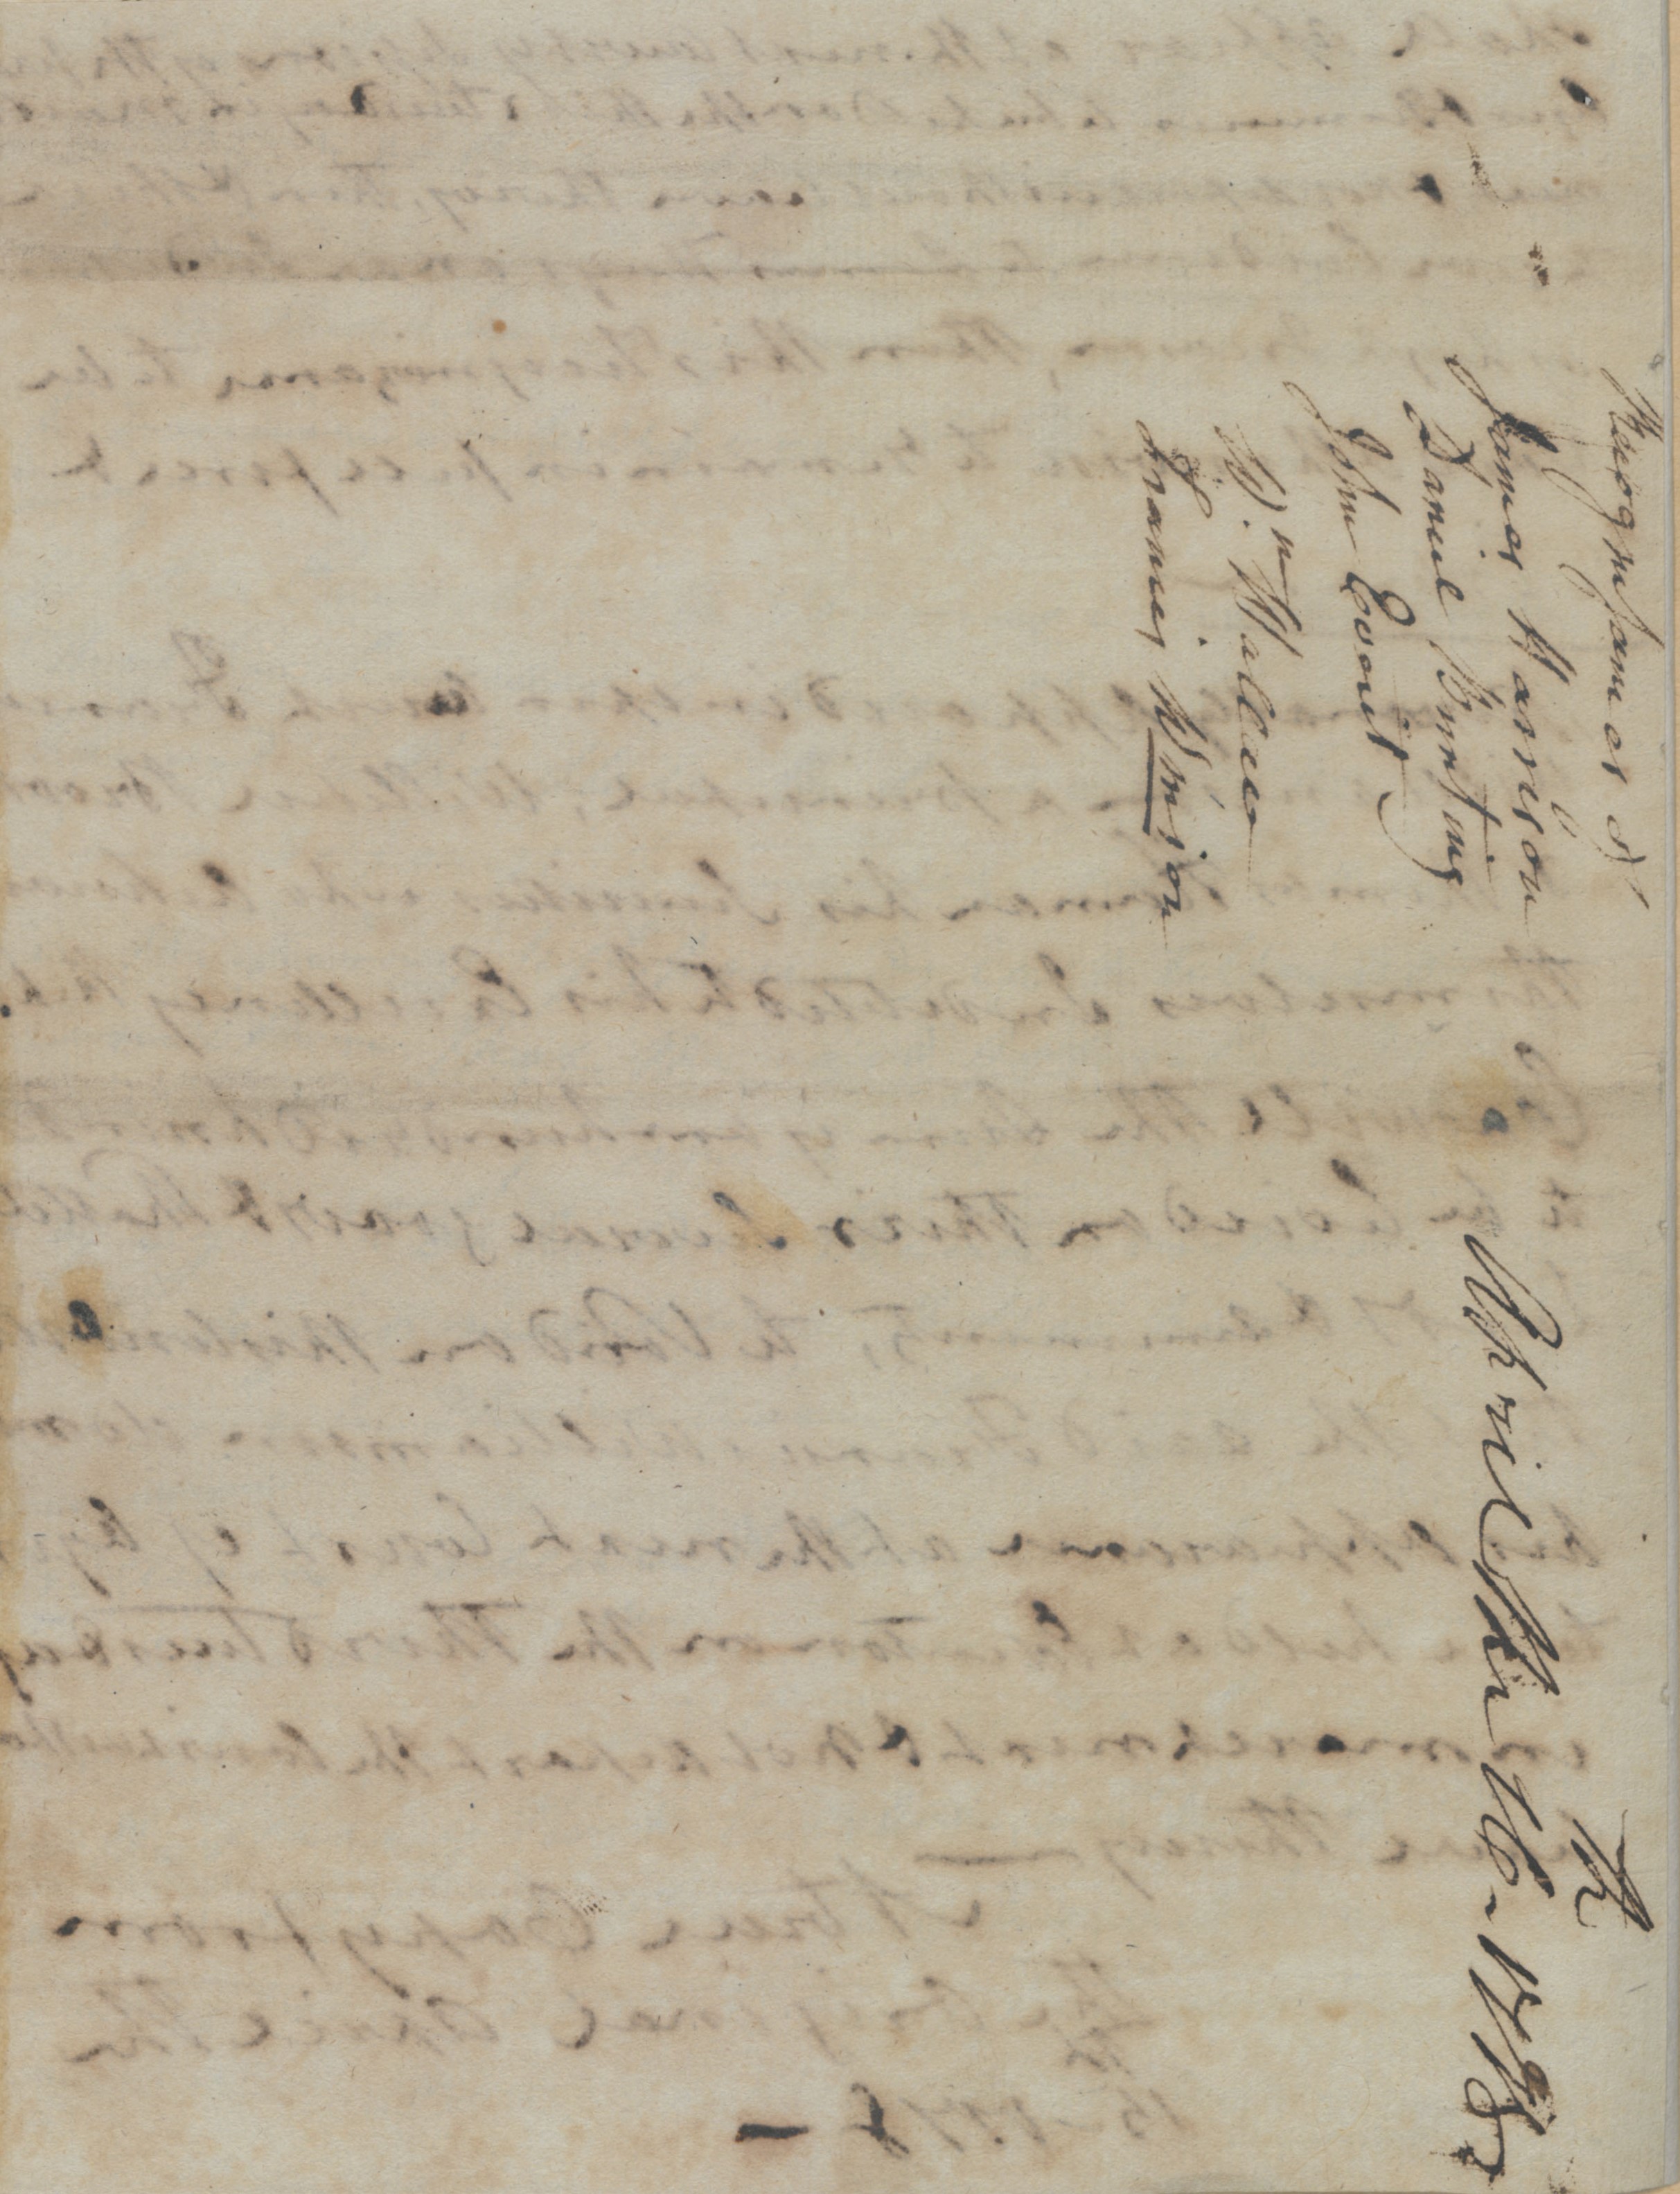 Bond from the Edenton District Court for James Harrison, Daniel Bunting, et. al., circa 10 October 1777, page 3